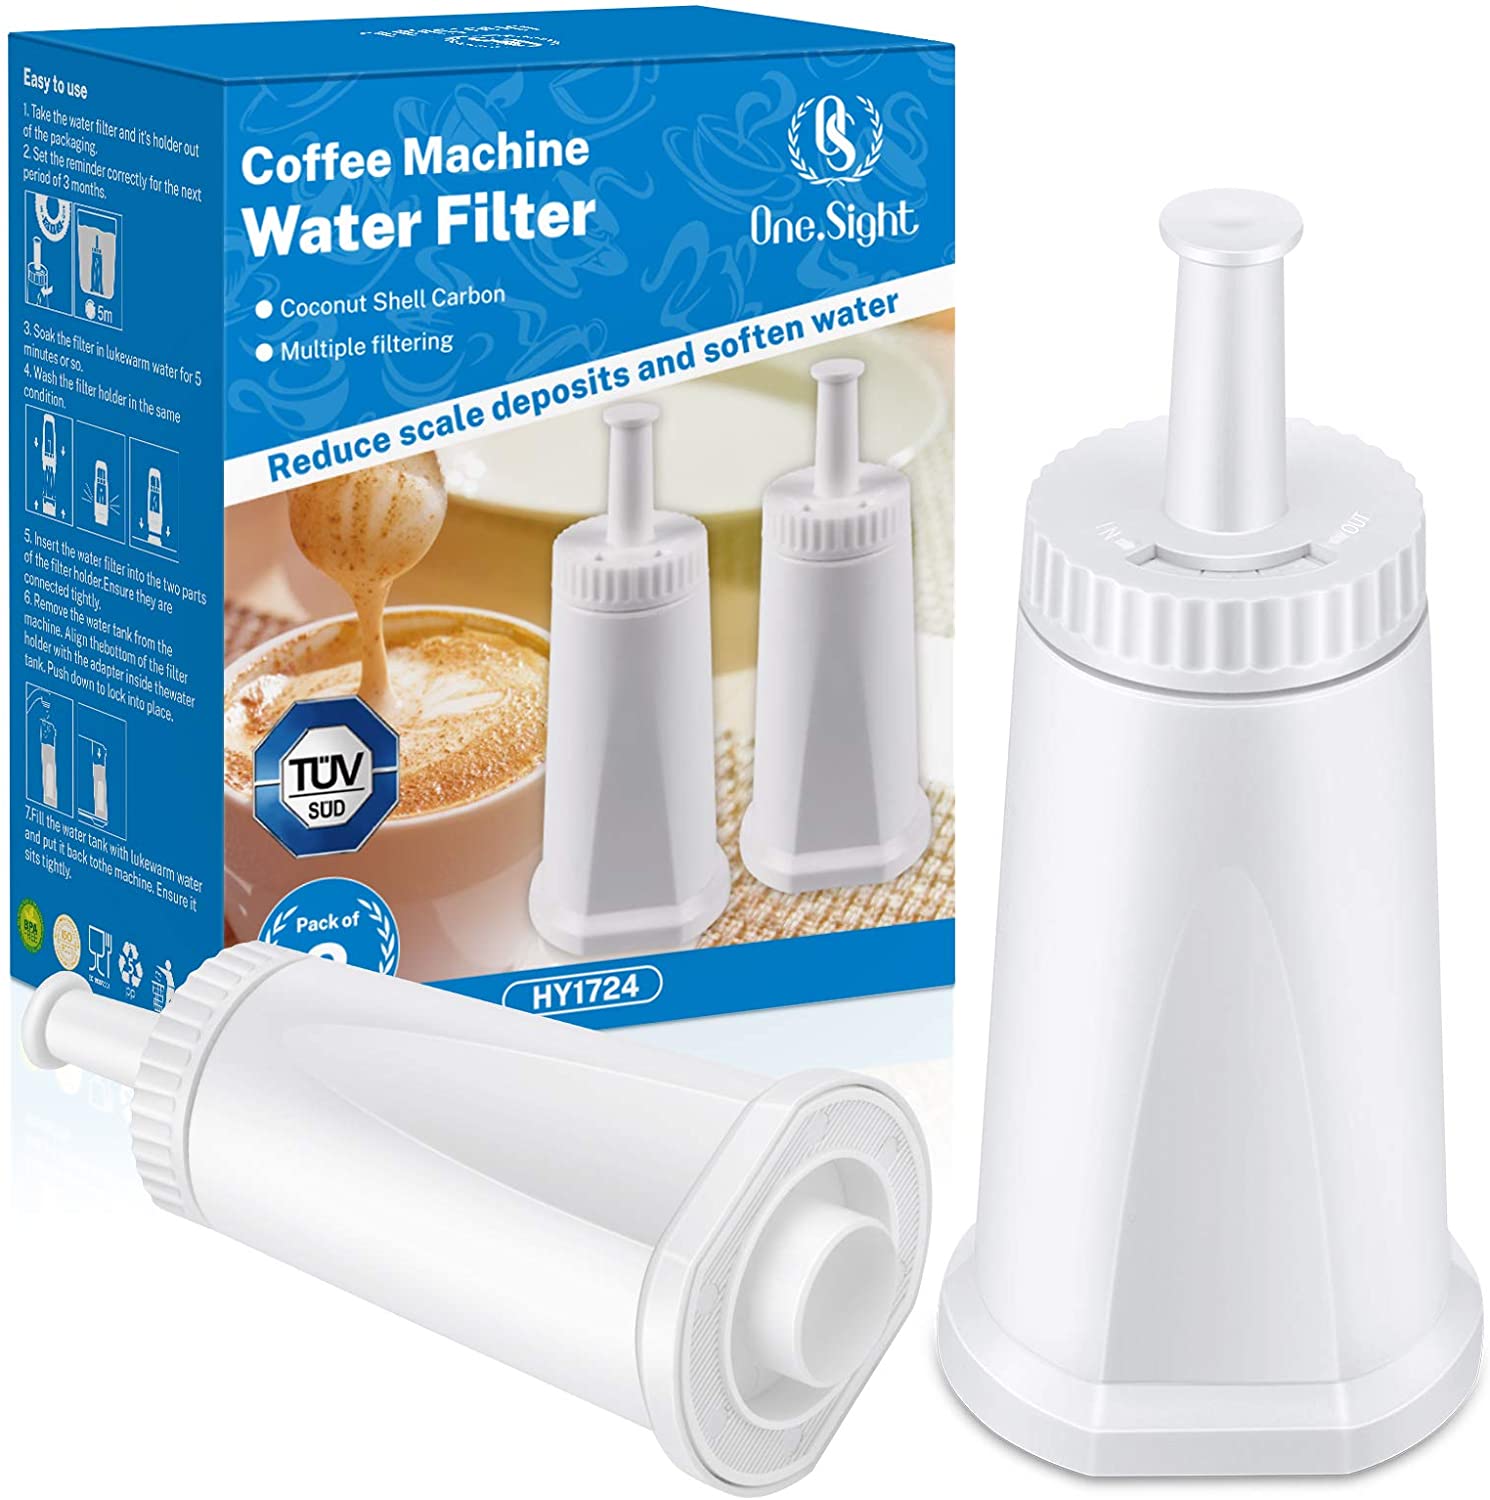 Kohree Water Filter for Bes008 Filter Ses810/ses875/ses880/ses920/ses980/ses990/ses878/ses500, Filter Accessories, Water Filter Cartridges for Oracle Barista Bambino, to Improve Coffee Taste